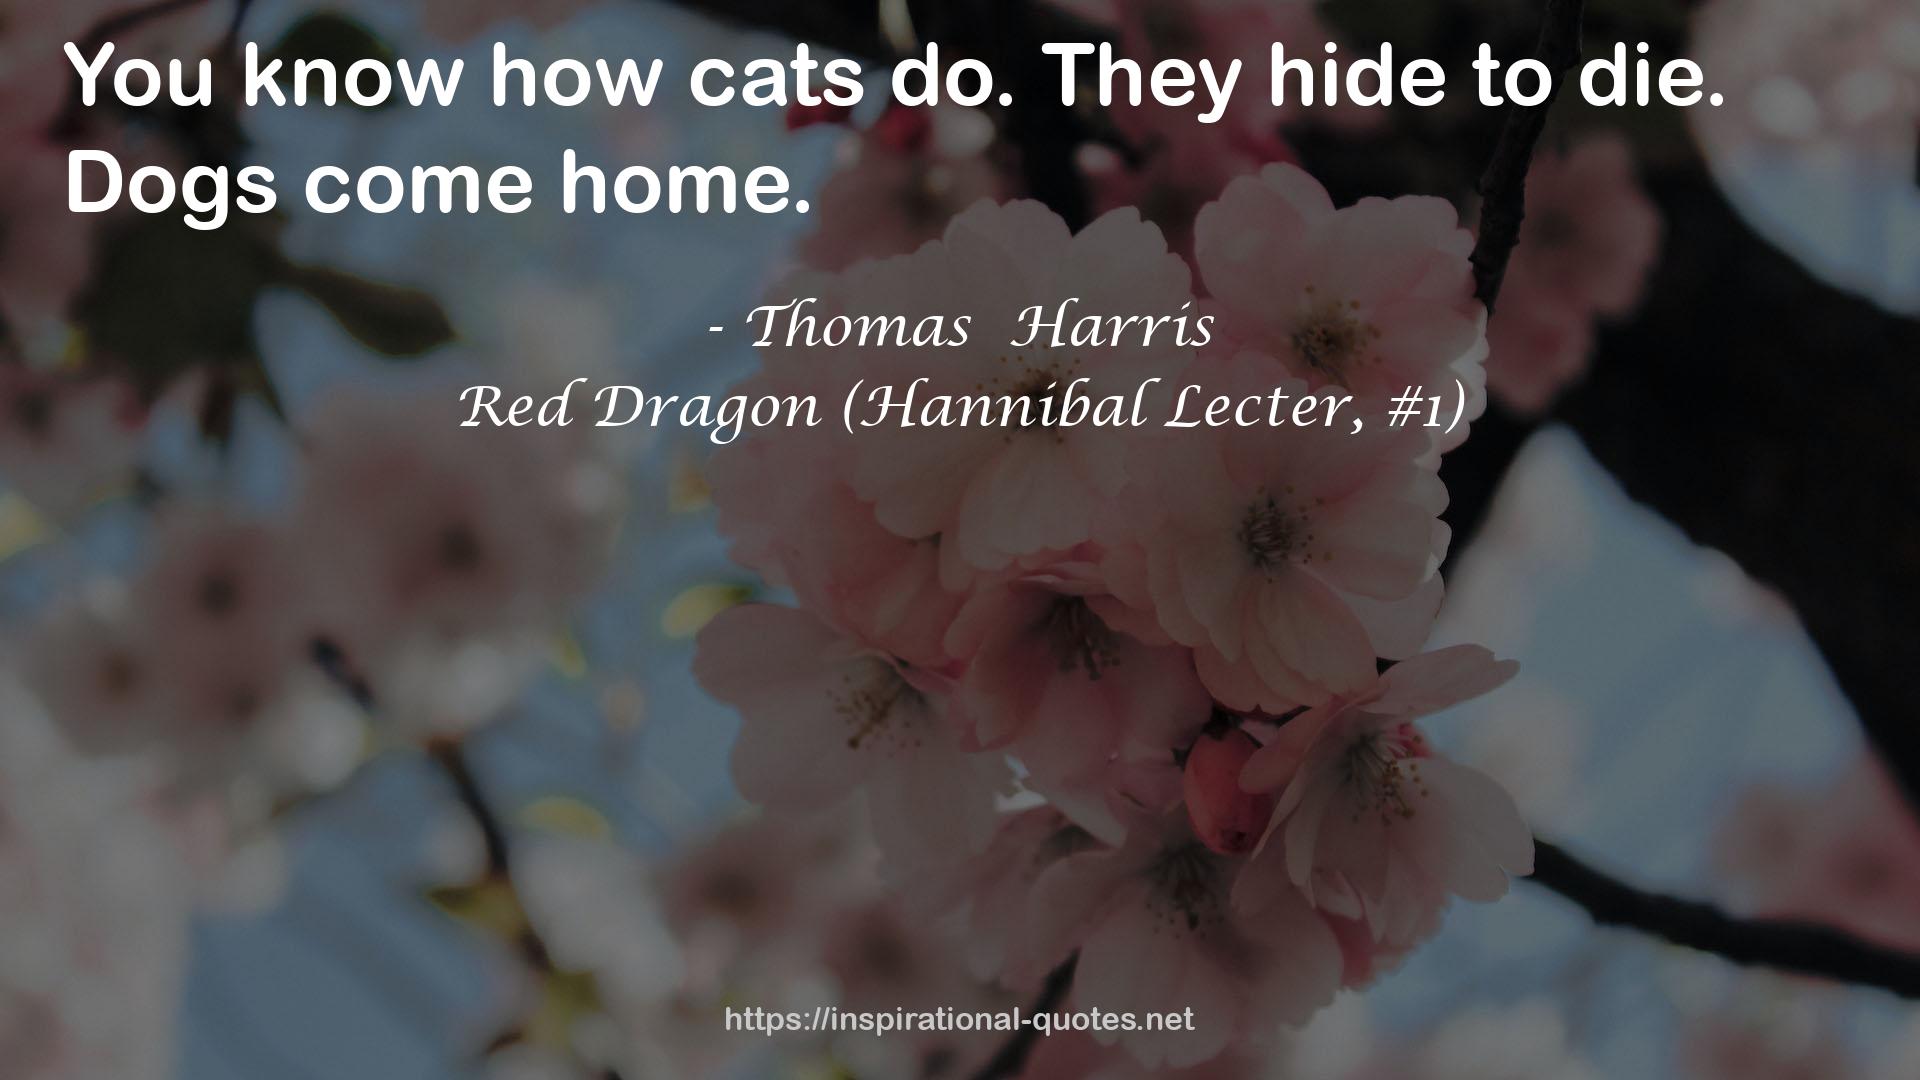 Red Dragon (Hannibal Lecter, #1) QUOTES